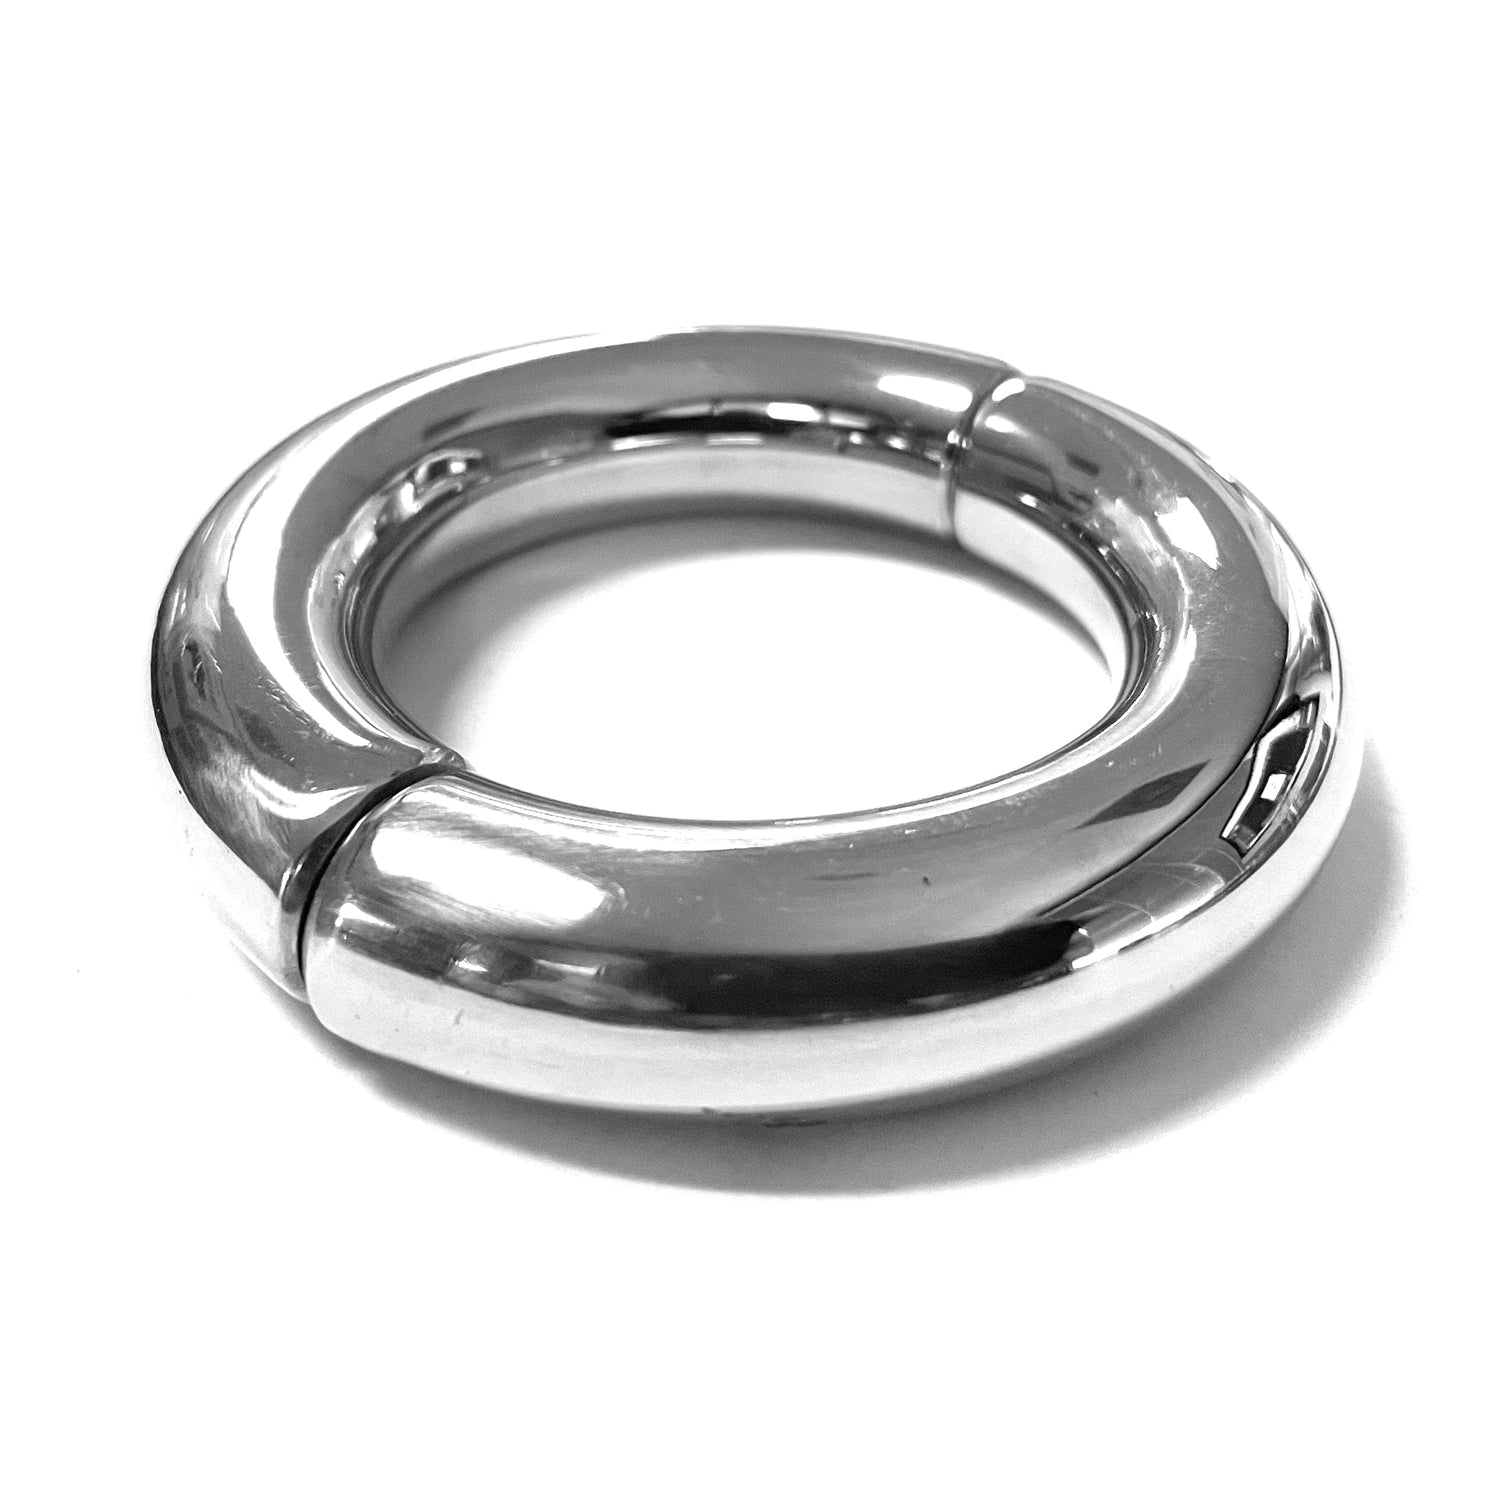 Magnetic Stainless Steel Ball Stretcher, 40mm